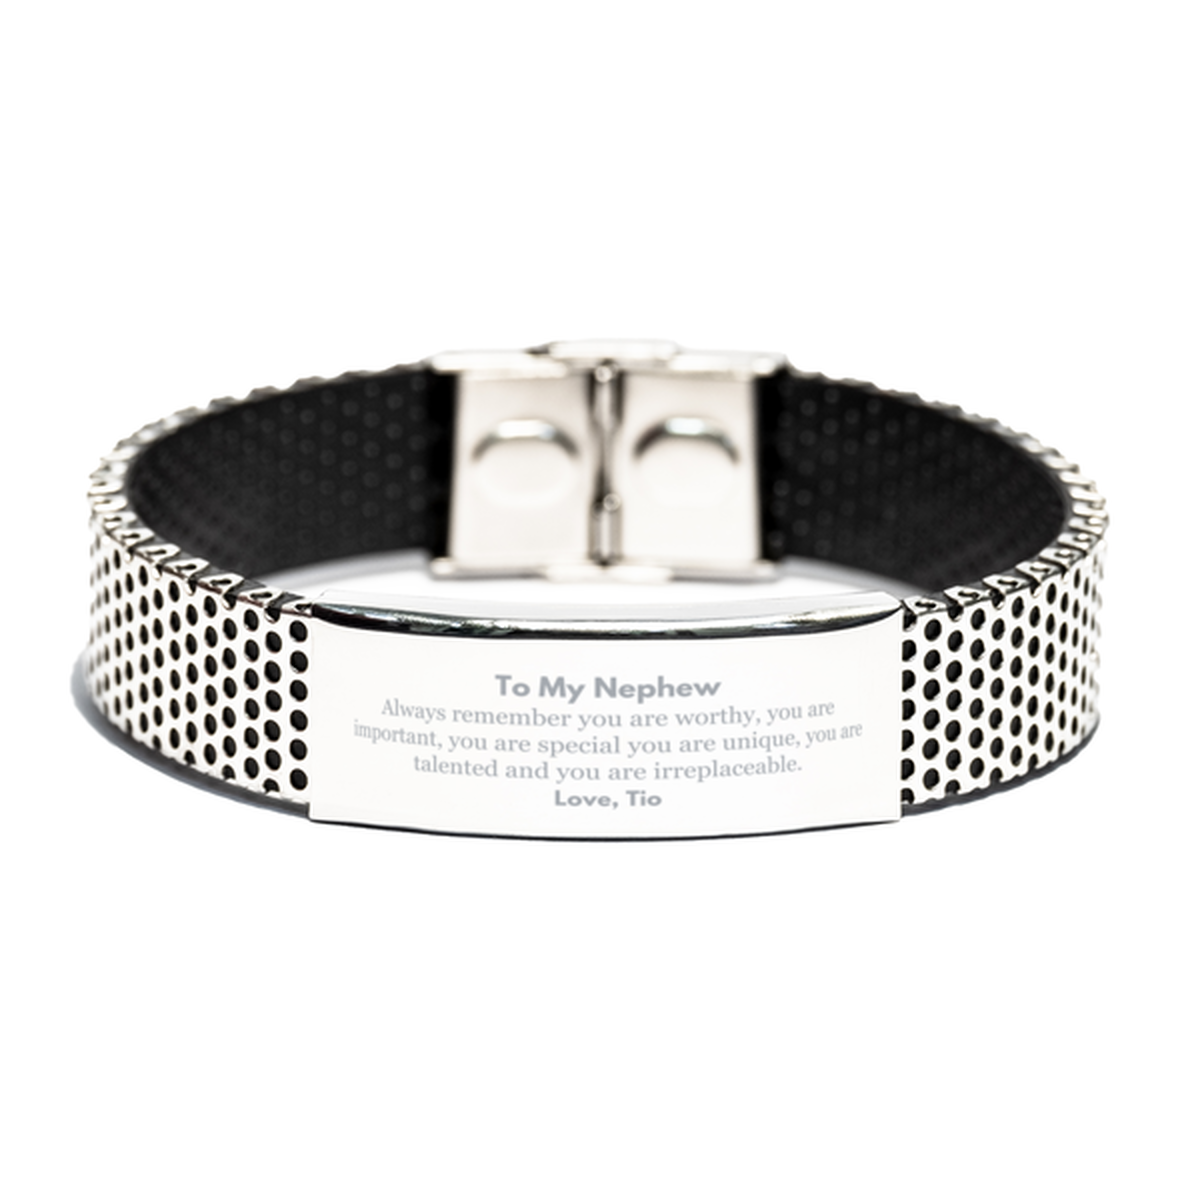 Nephew Birthday Gifts from Tio, Inspirational Stainless Steel Bracelet for Nephew Christmas Graduation Gifts for Nephew Always remember you are worthy, you are important. Love, Tio